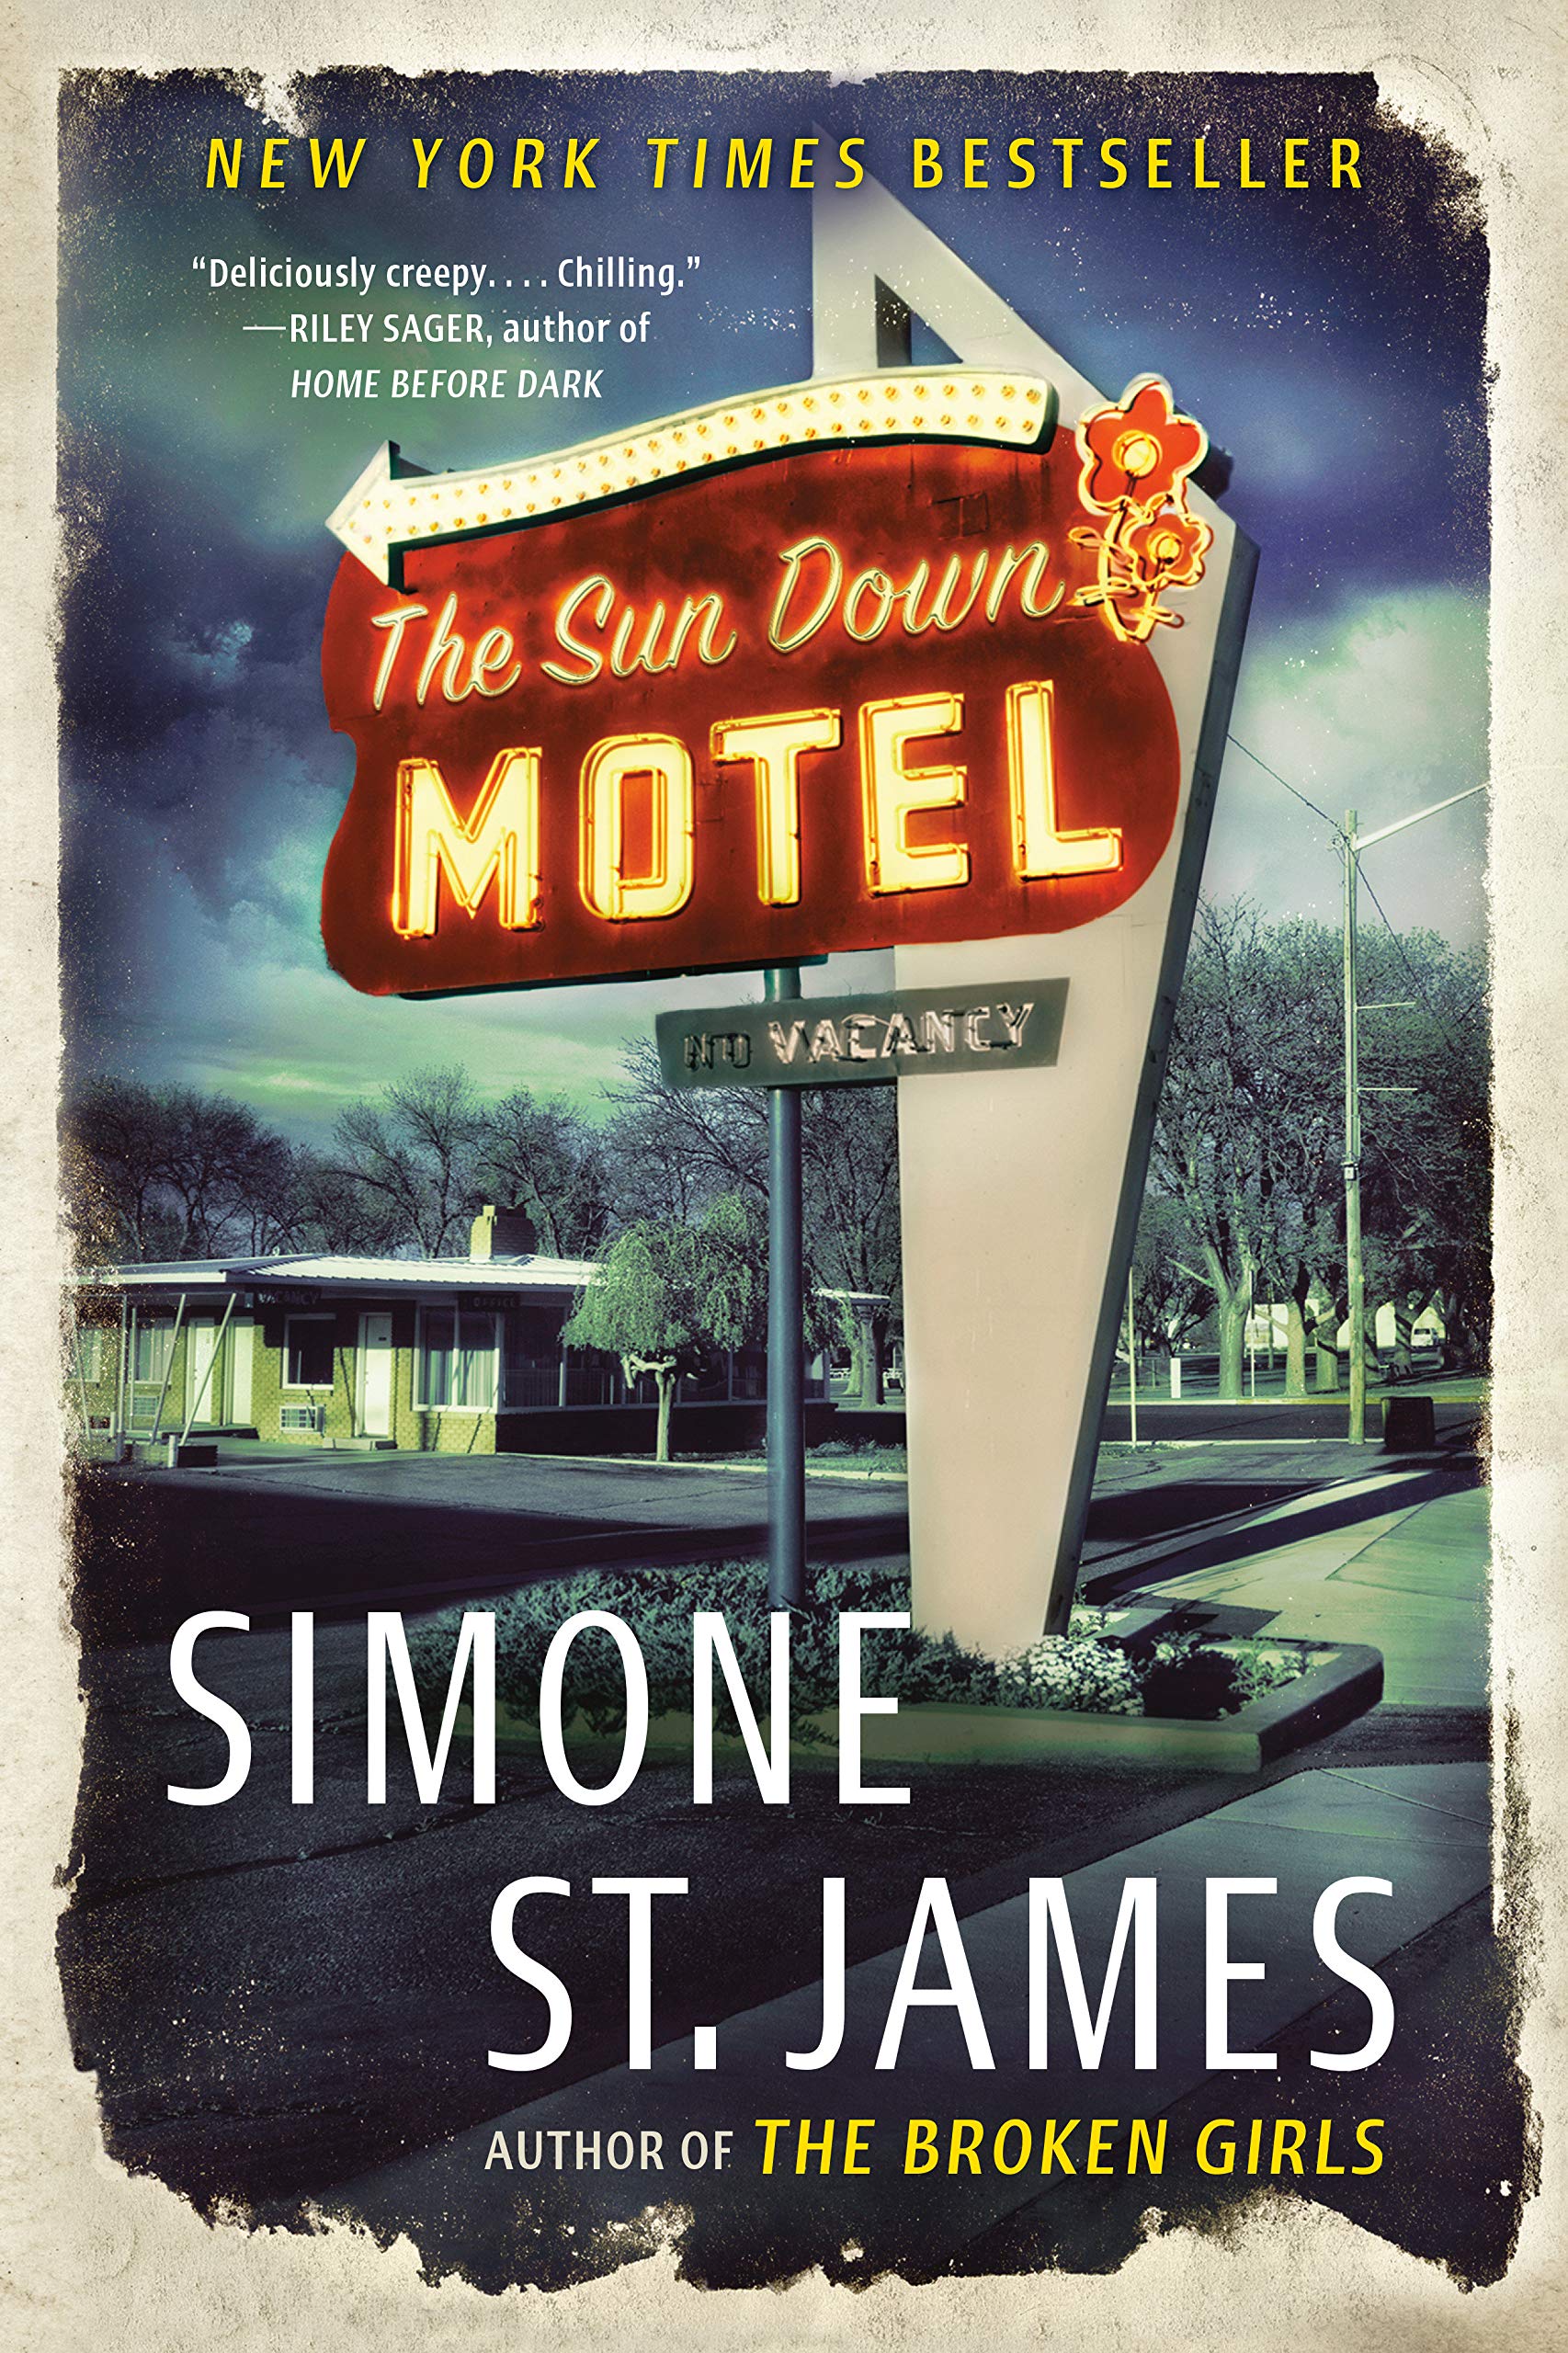 Cover of The Sun Down Motel by Simone St. James